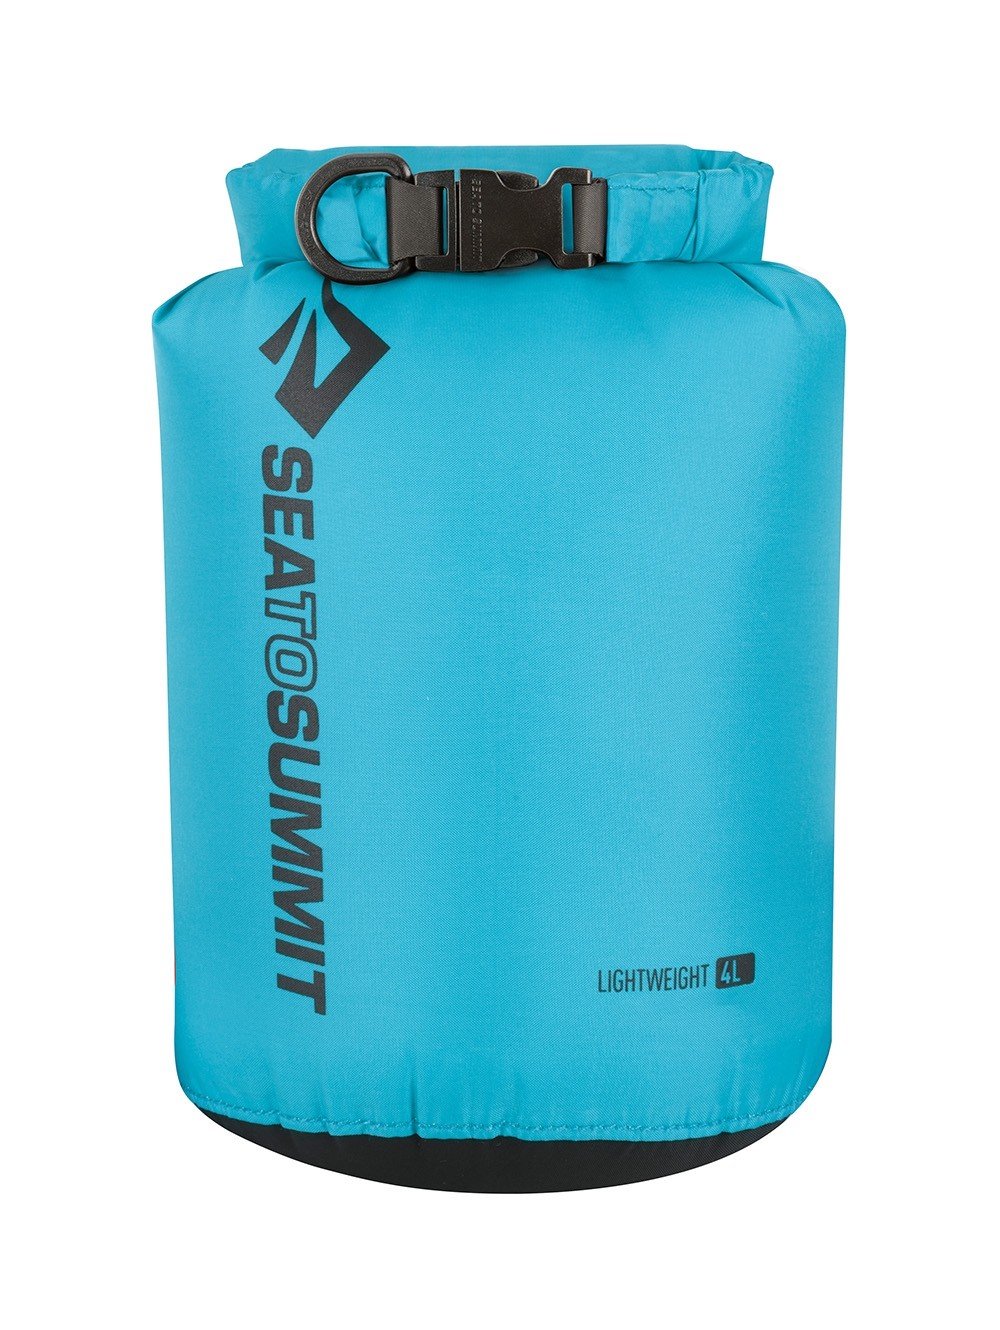 Sea To Summit Lightweight 70D 4 Litres Dry Sack Bags, Packs and Cases Sea To Summit Blue Tactical Gear Supplier Tactical Distributors Australia